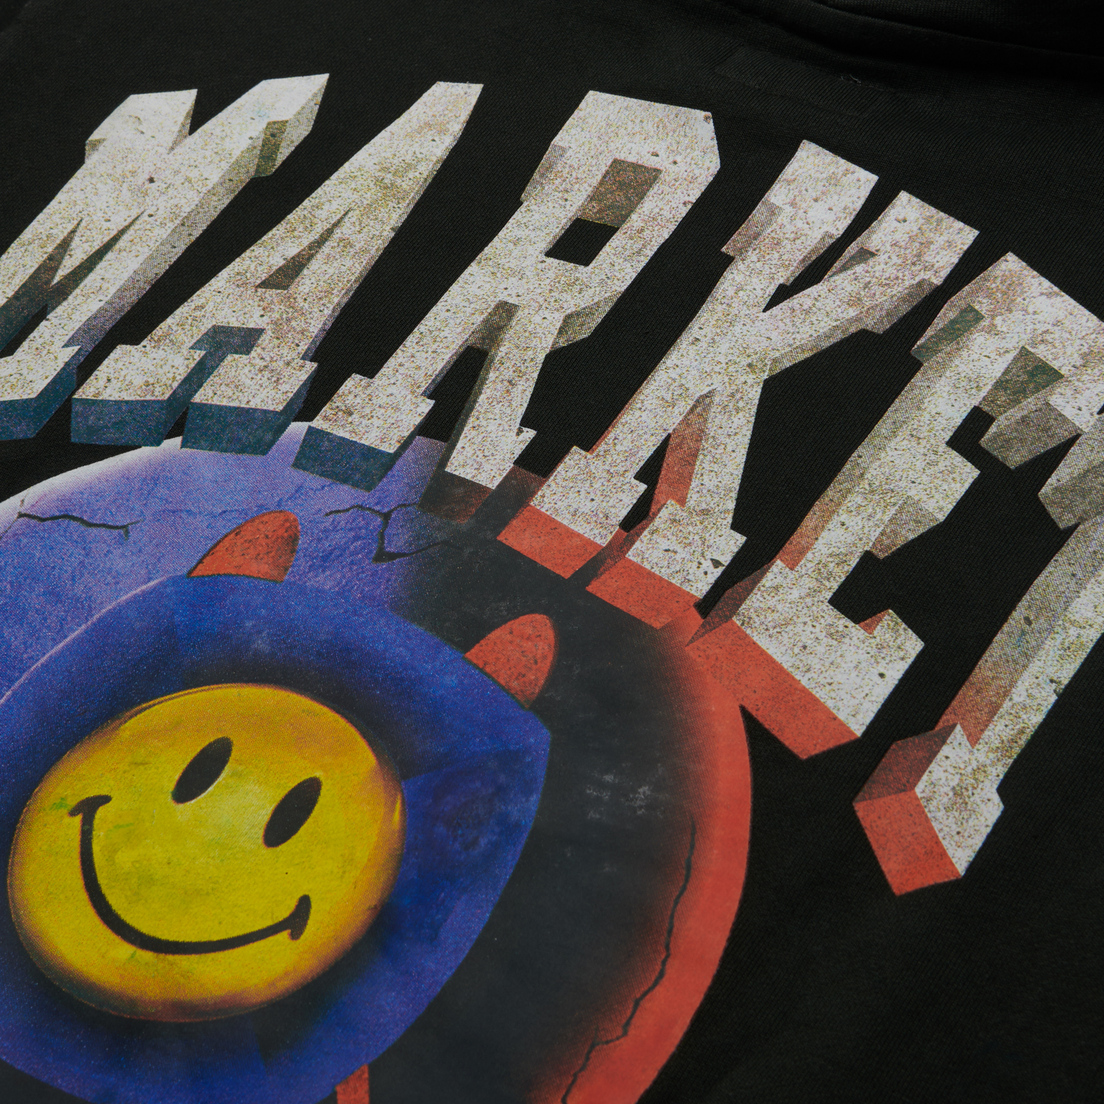 MARKET Мужская толстовка Smiley Happiness Within Hoodie